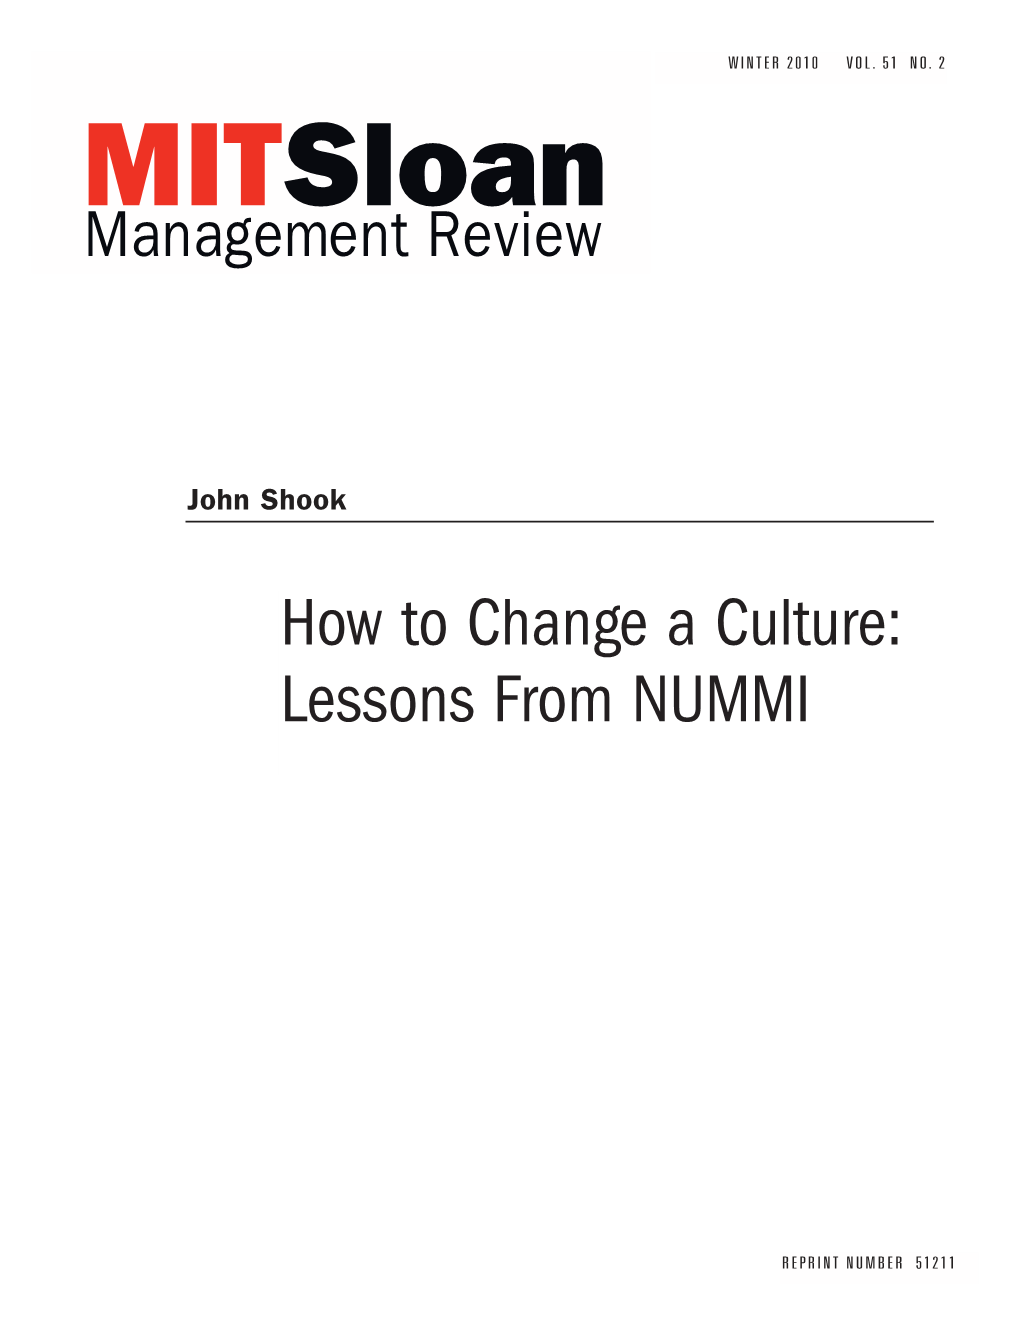 How to Change a Culture: Lessons from NUMMI